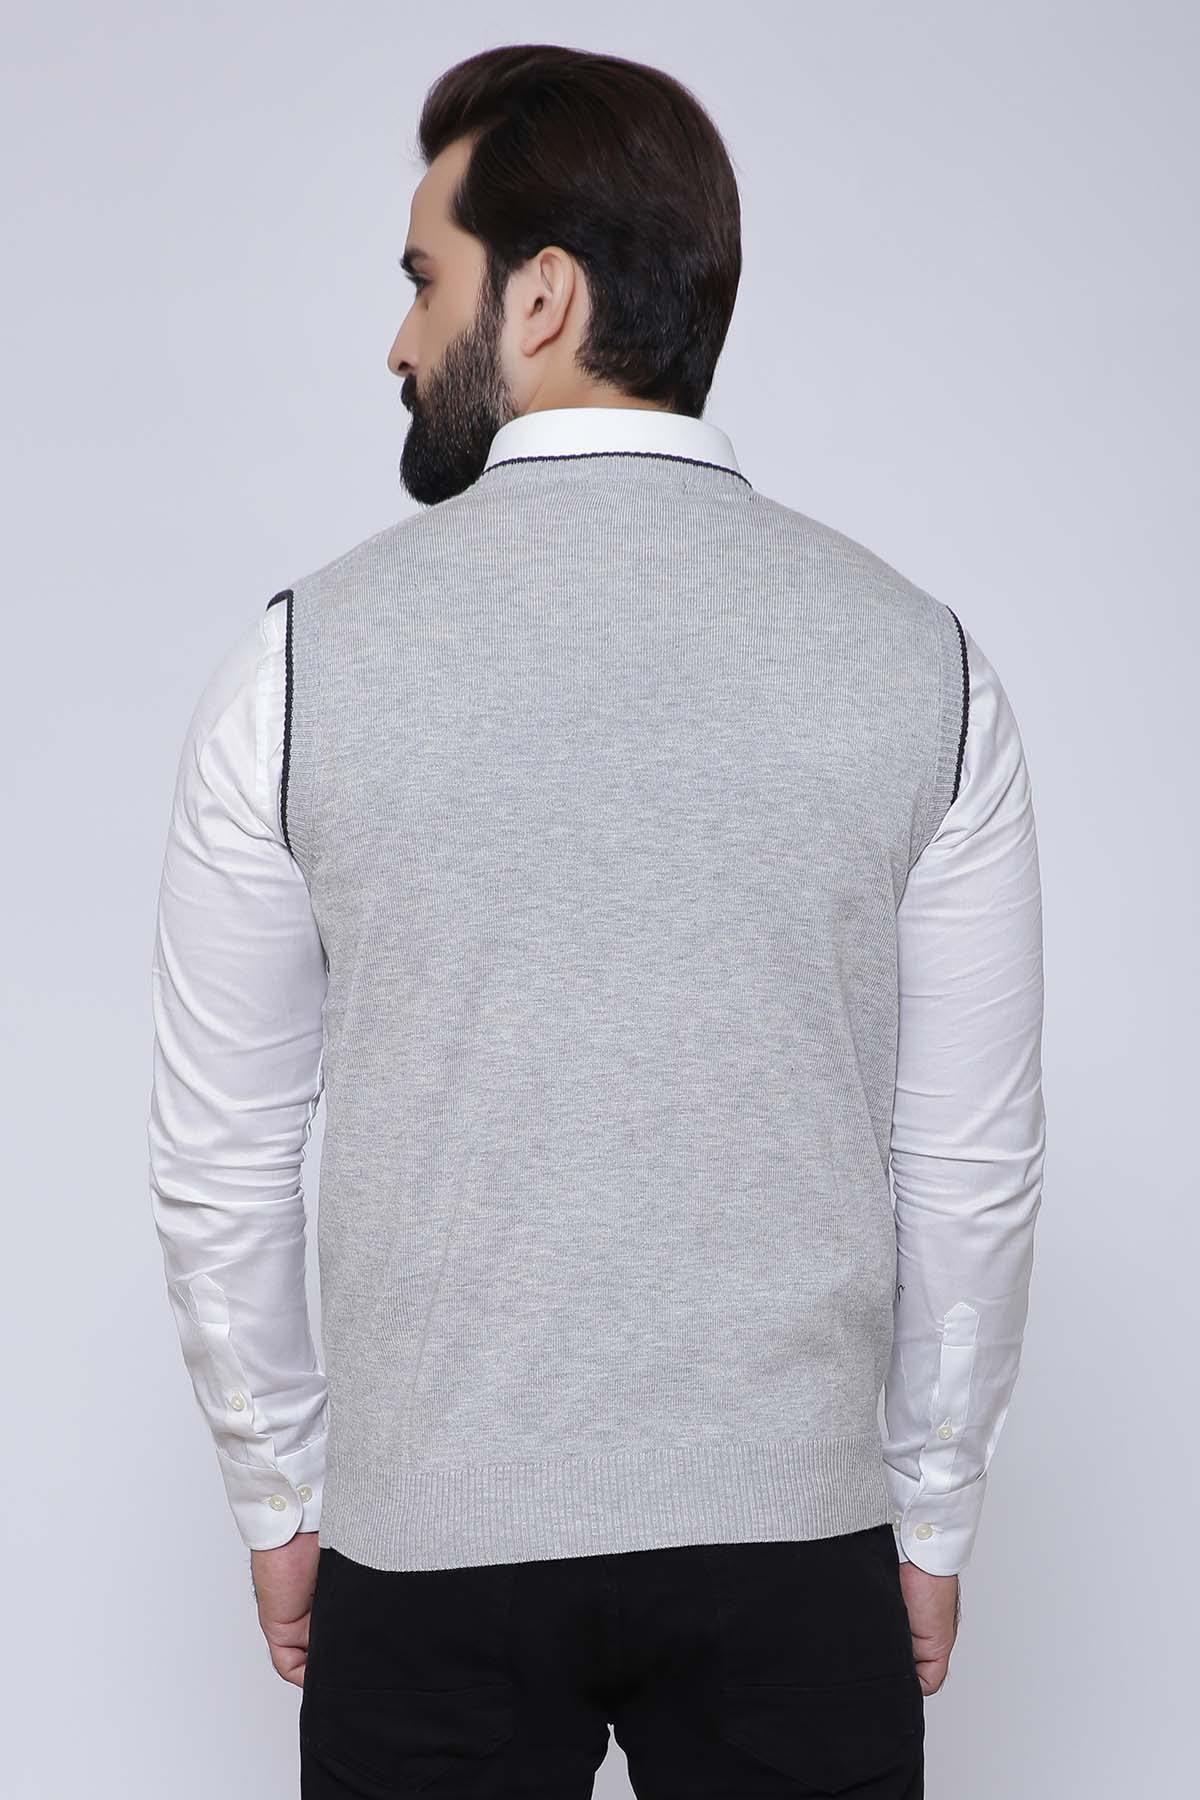 SWEATER V NECK SLEEVE LESS LIGHT GREY at Charcoal Clothing